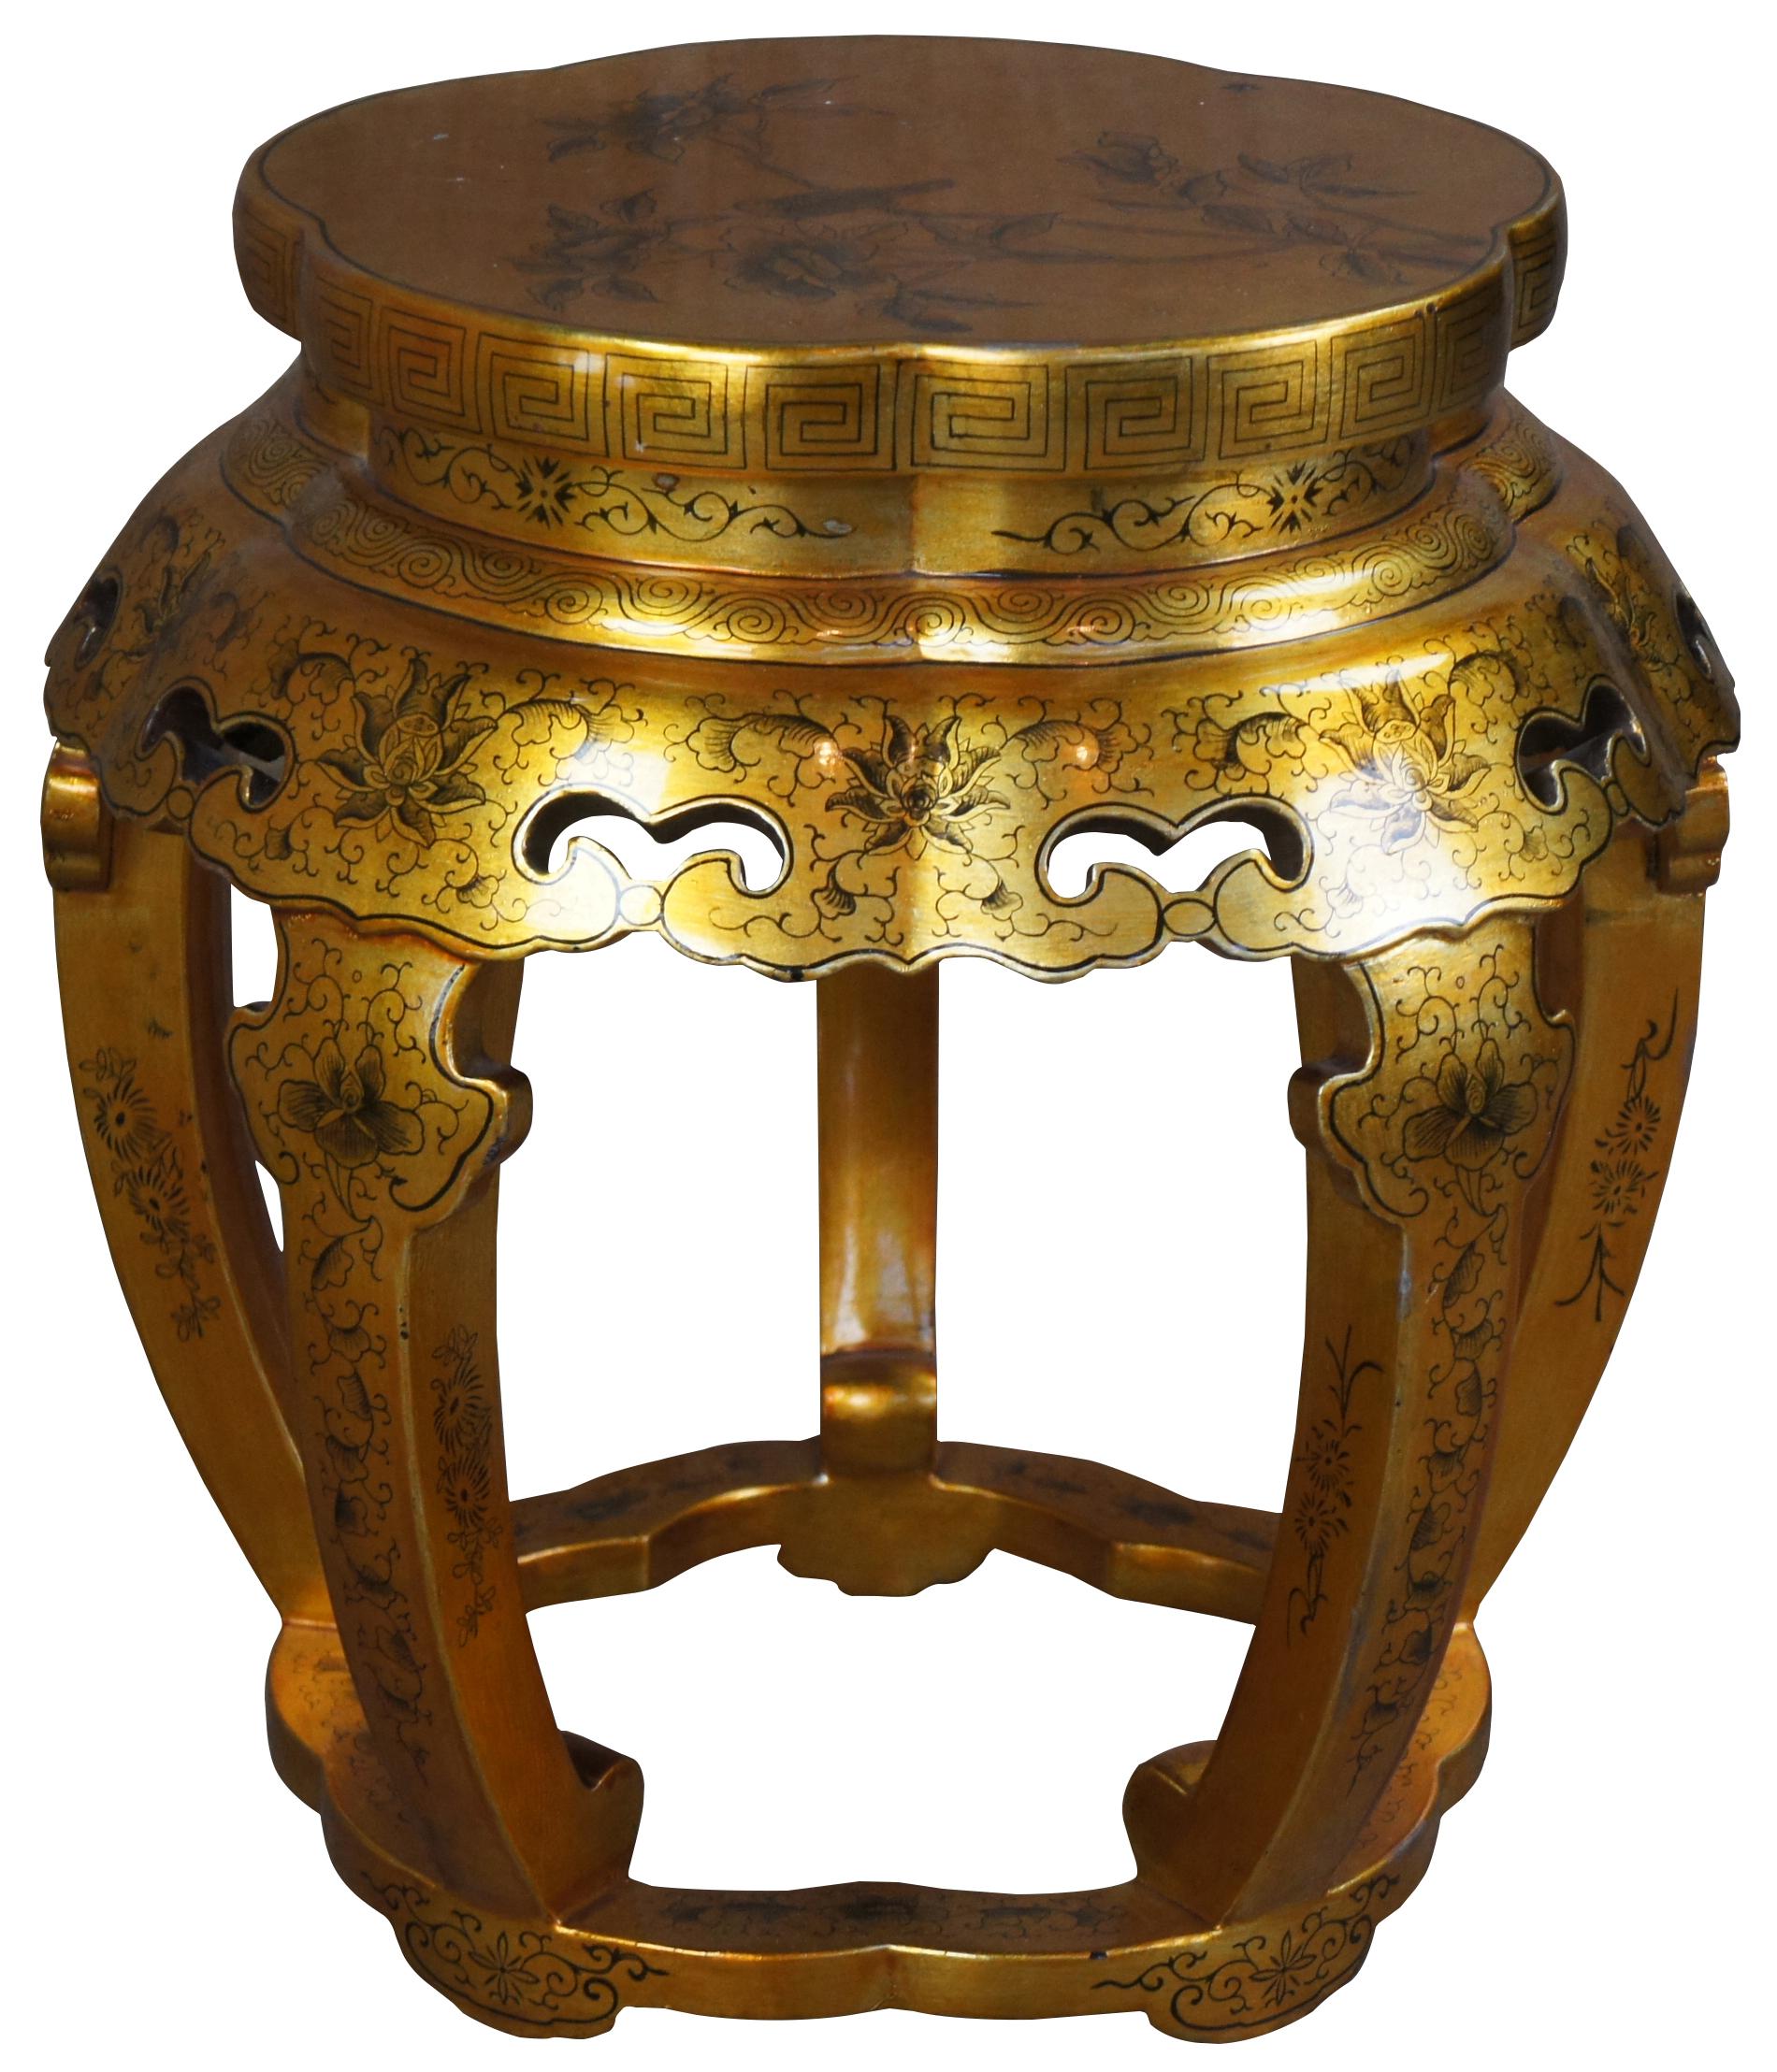 Vibrant 20th century gold and black oriental gardent stool or stand. An elaborate design with a pierced apron with flowing flowers, scrolling clouds and Greek key trim. Features a bird perched along the top.
  